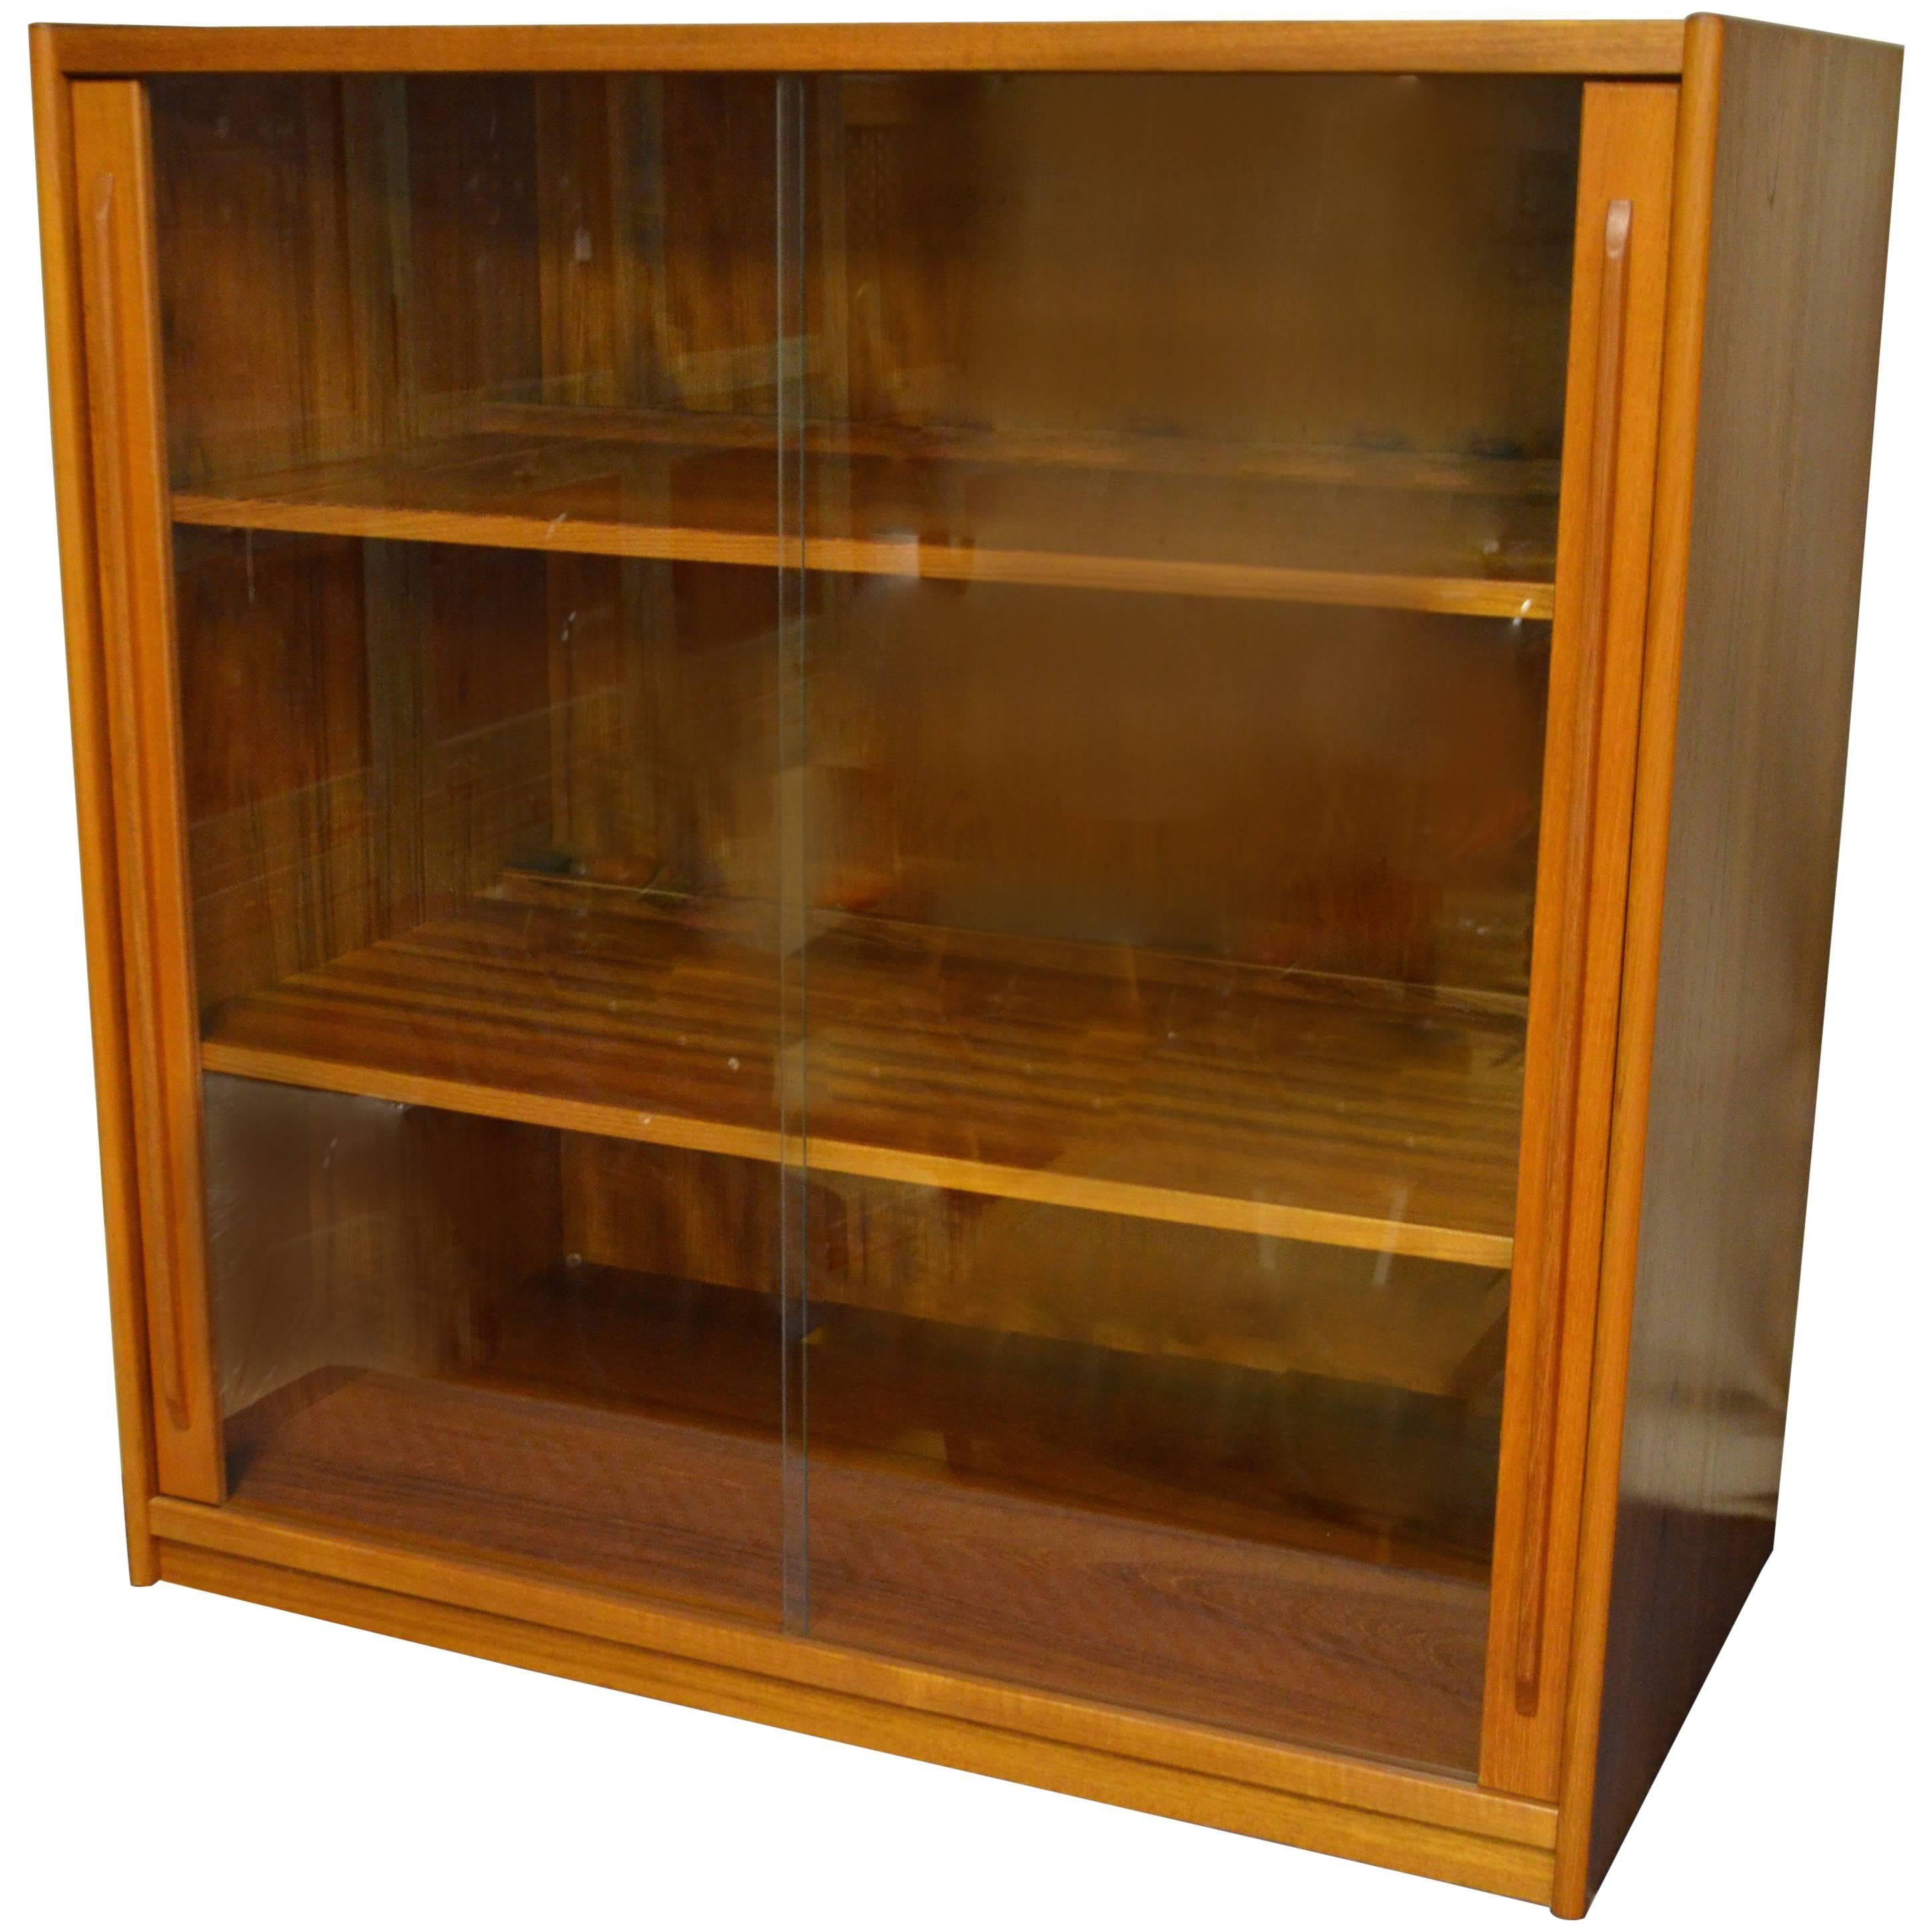 Storage Cabinet, Teak with Glass Doors, Wired for Electronics, Midcentury